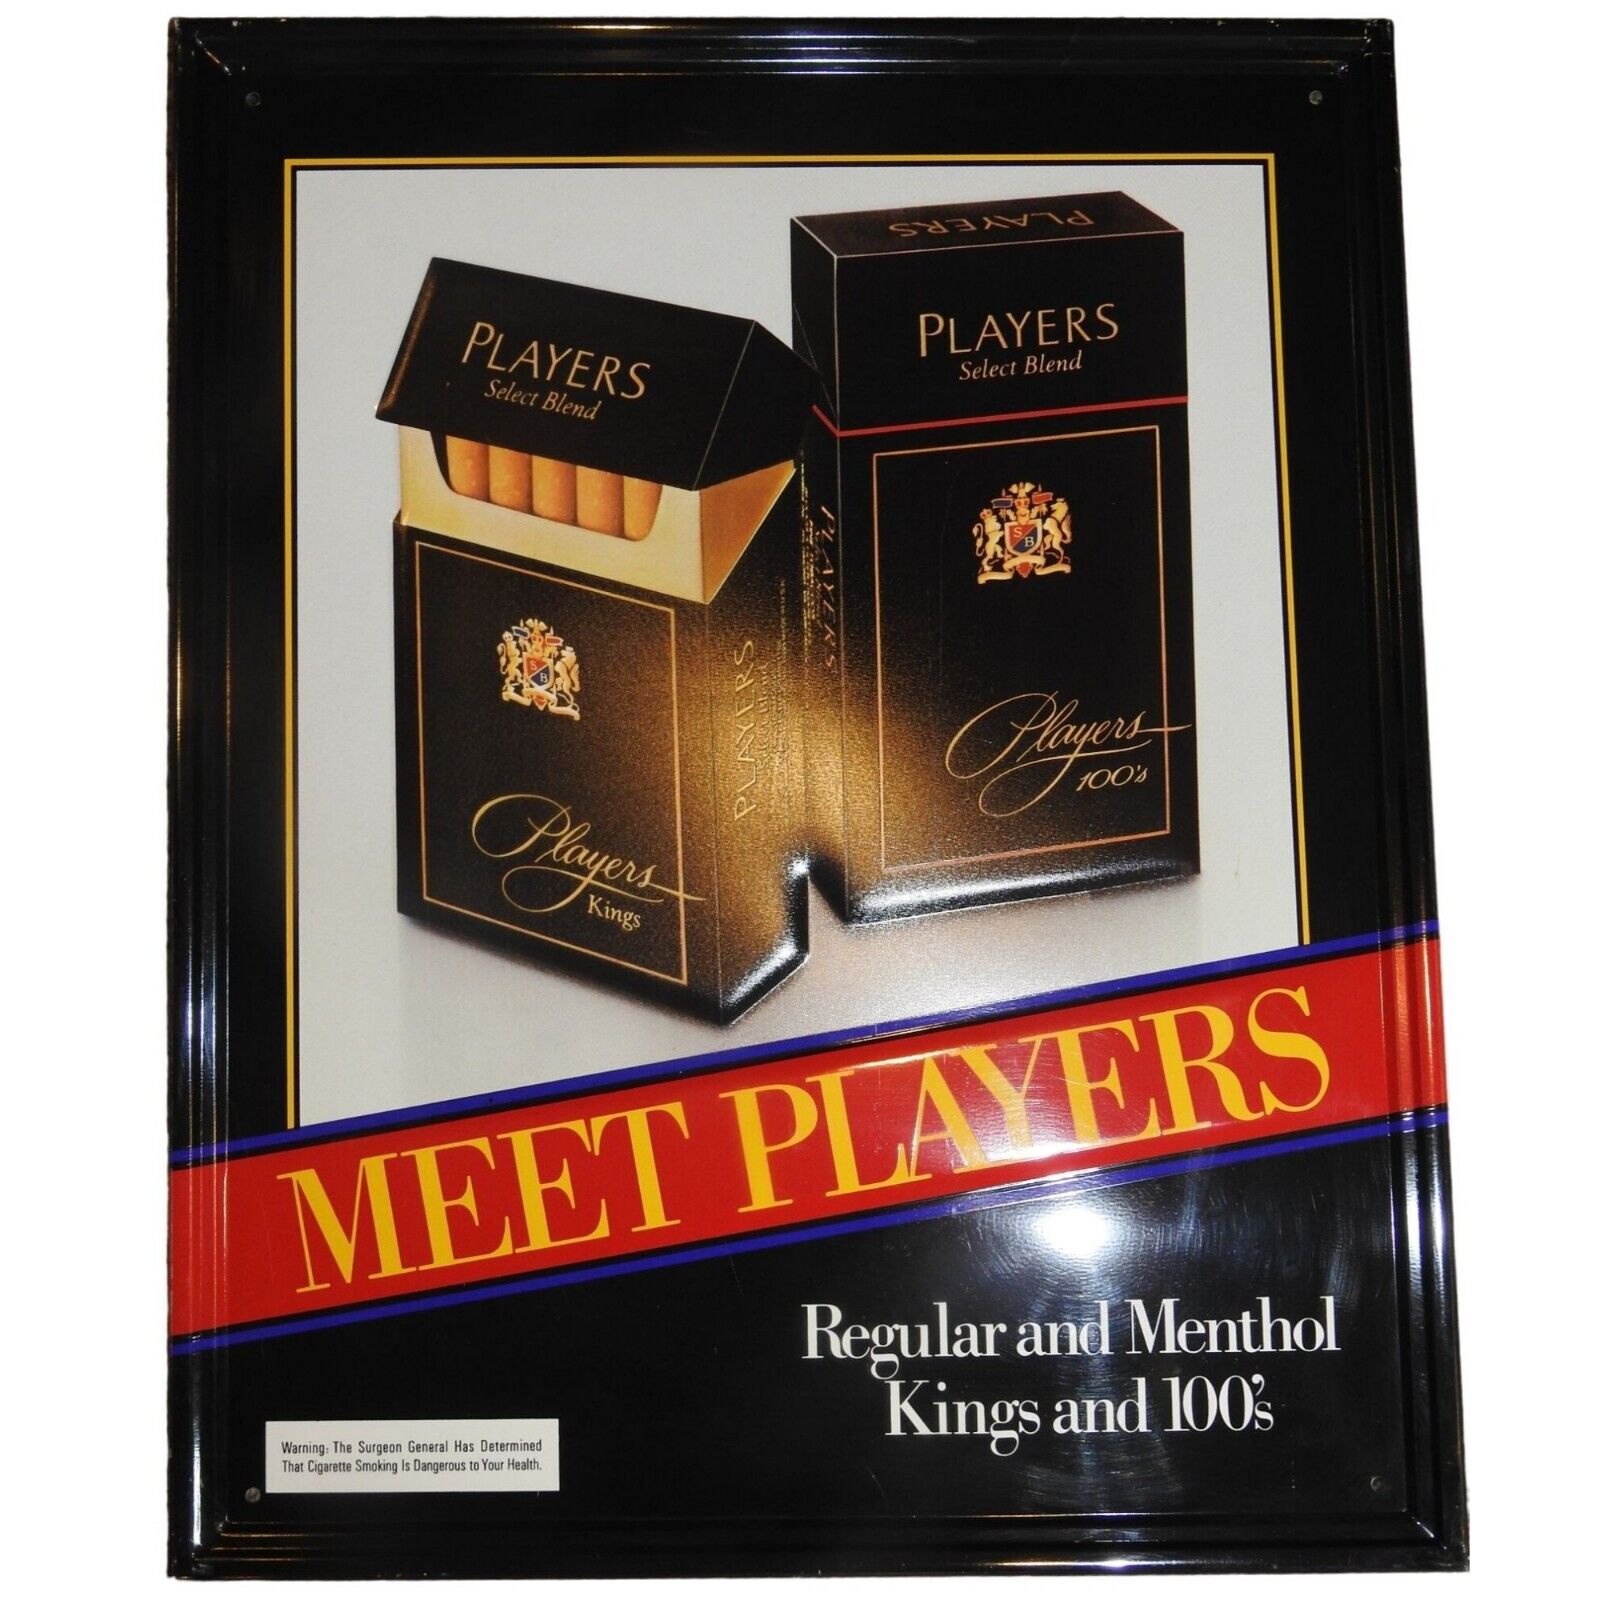 Vintage 1980s NOS Meet Players Cigarette Tin Sign Black Pack Advertising 17x21